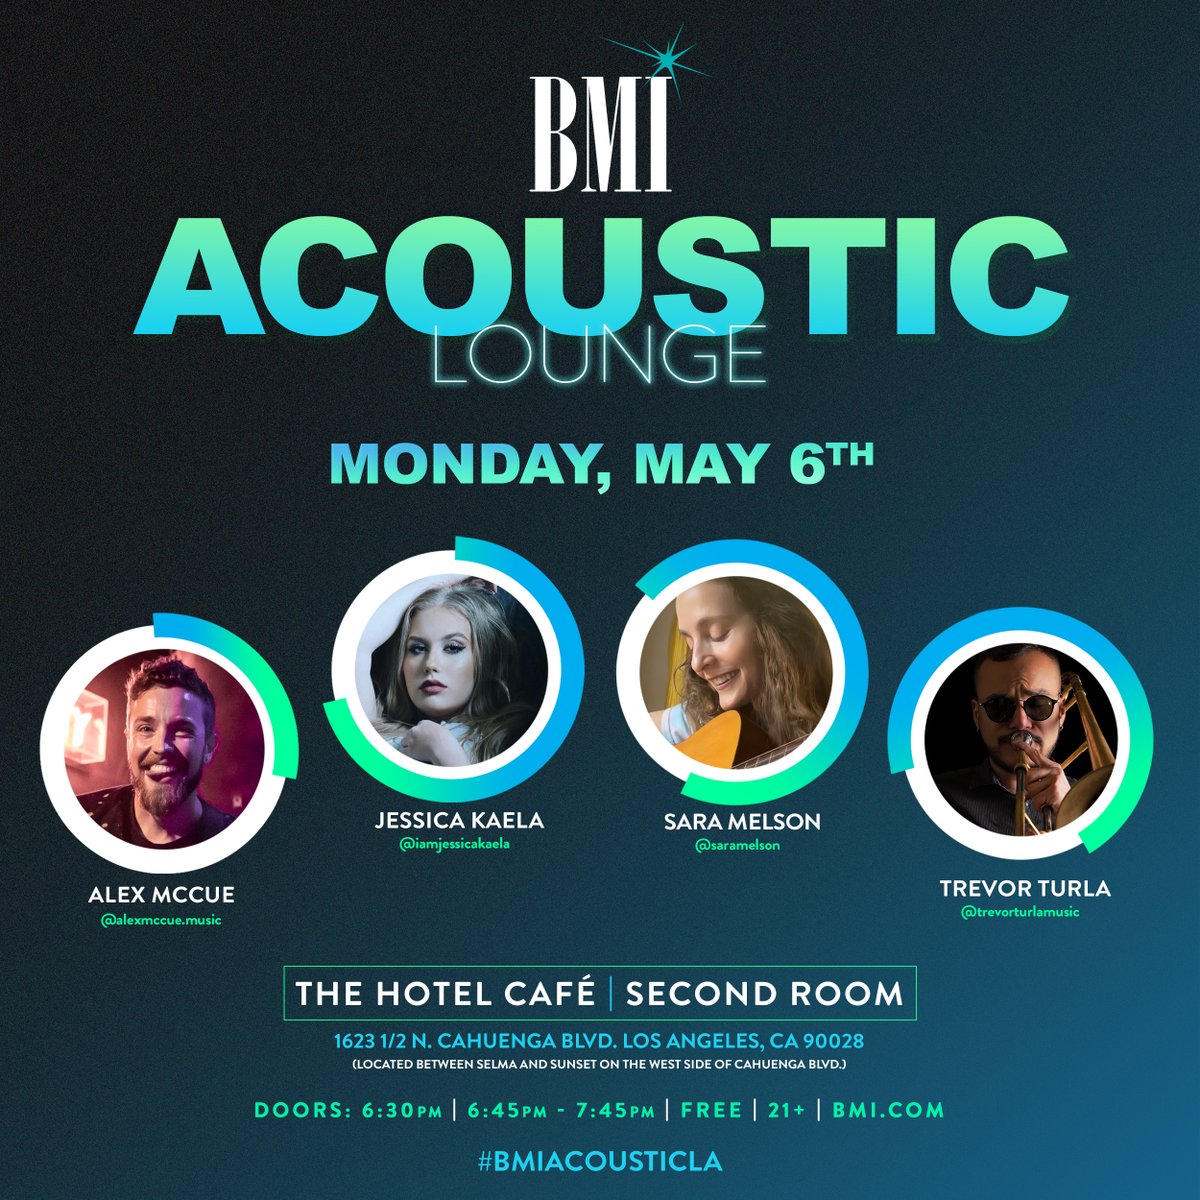 This month's Acoustic Lounge is featuring our #BMIFamily #AlexMcCue, #JessicaKaela, #SaraMelson and #TrevorTurla at @thehotelcafe in LA on Monday, May 6th! Be sure to come out. 🎶✨  #BMIAcousticLA